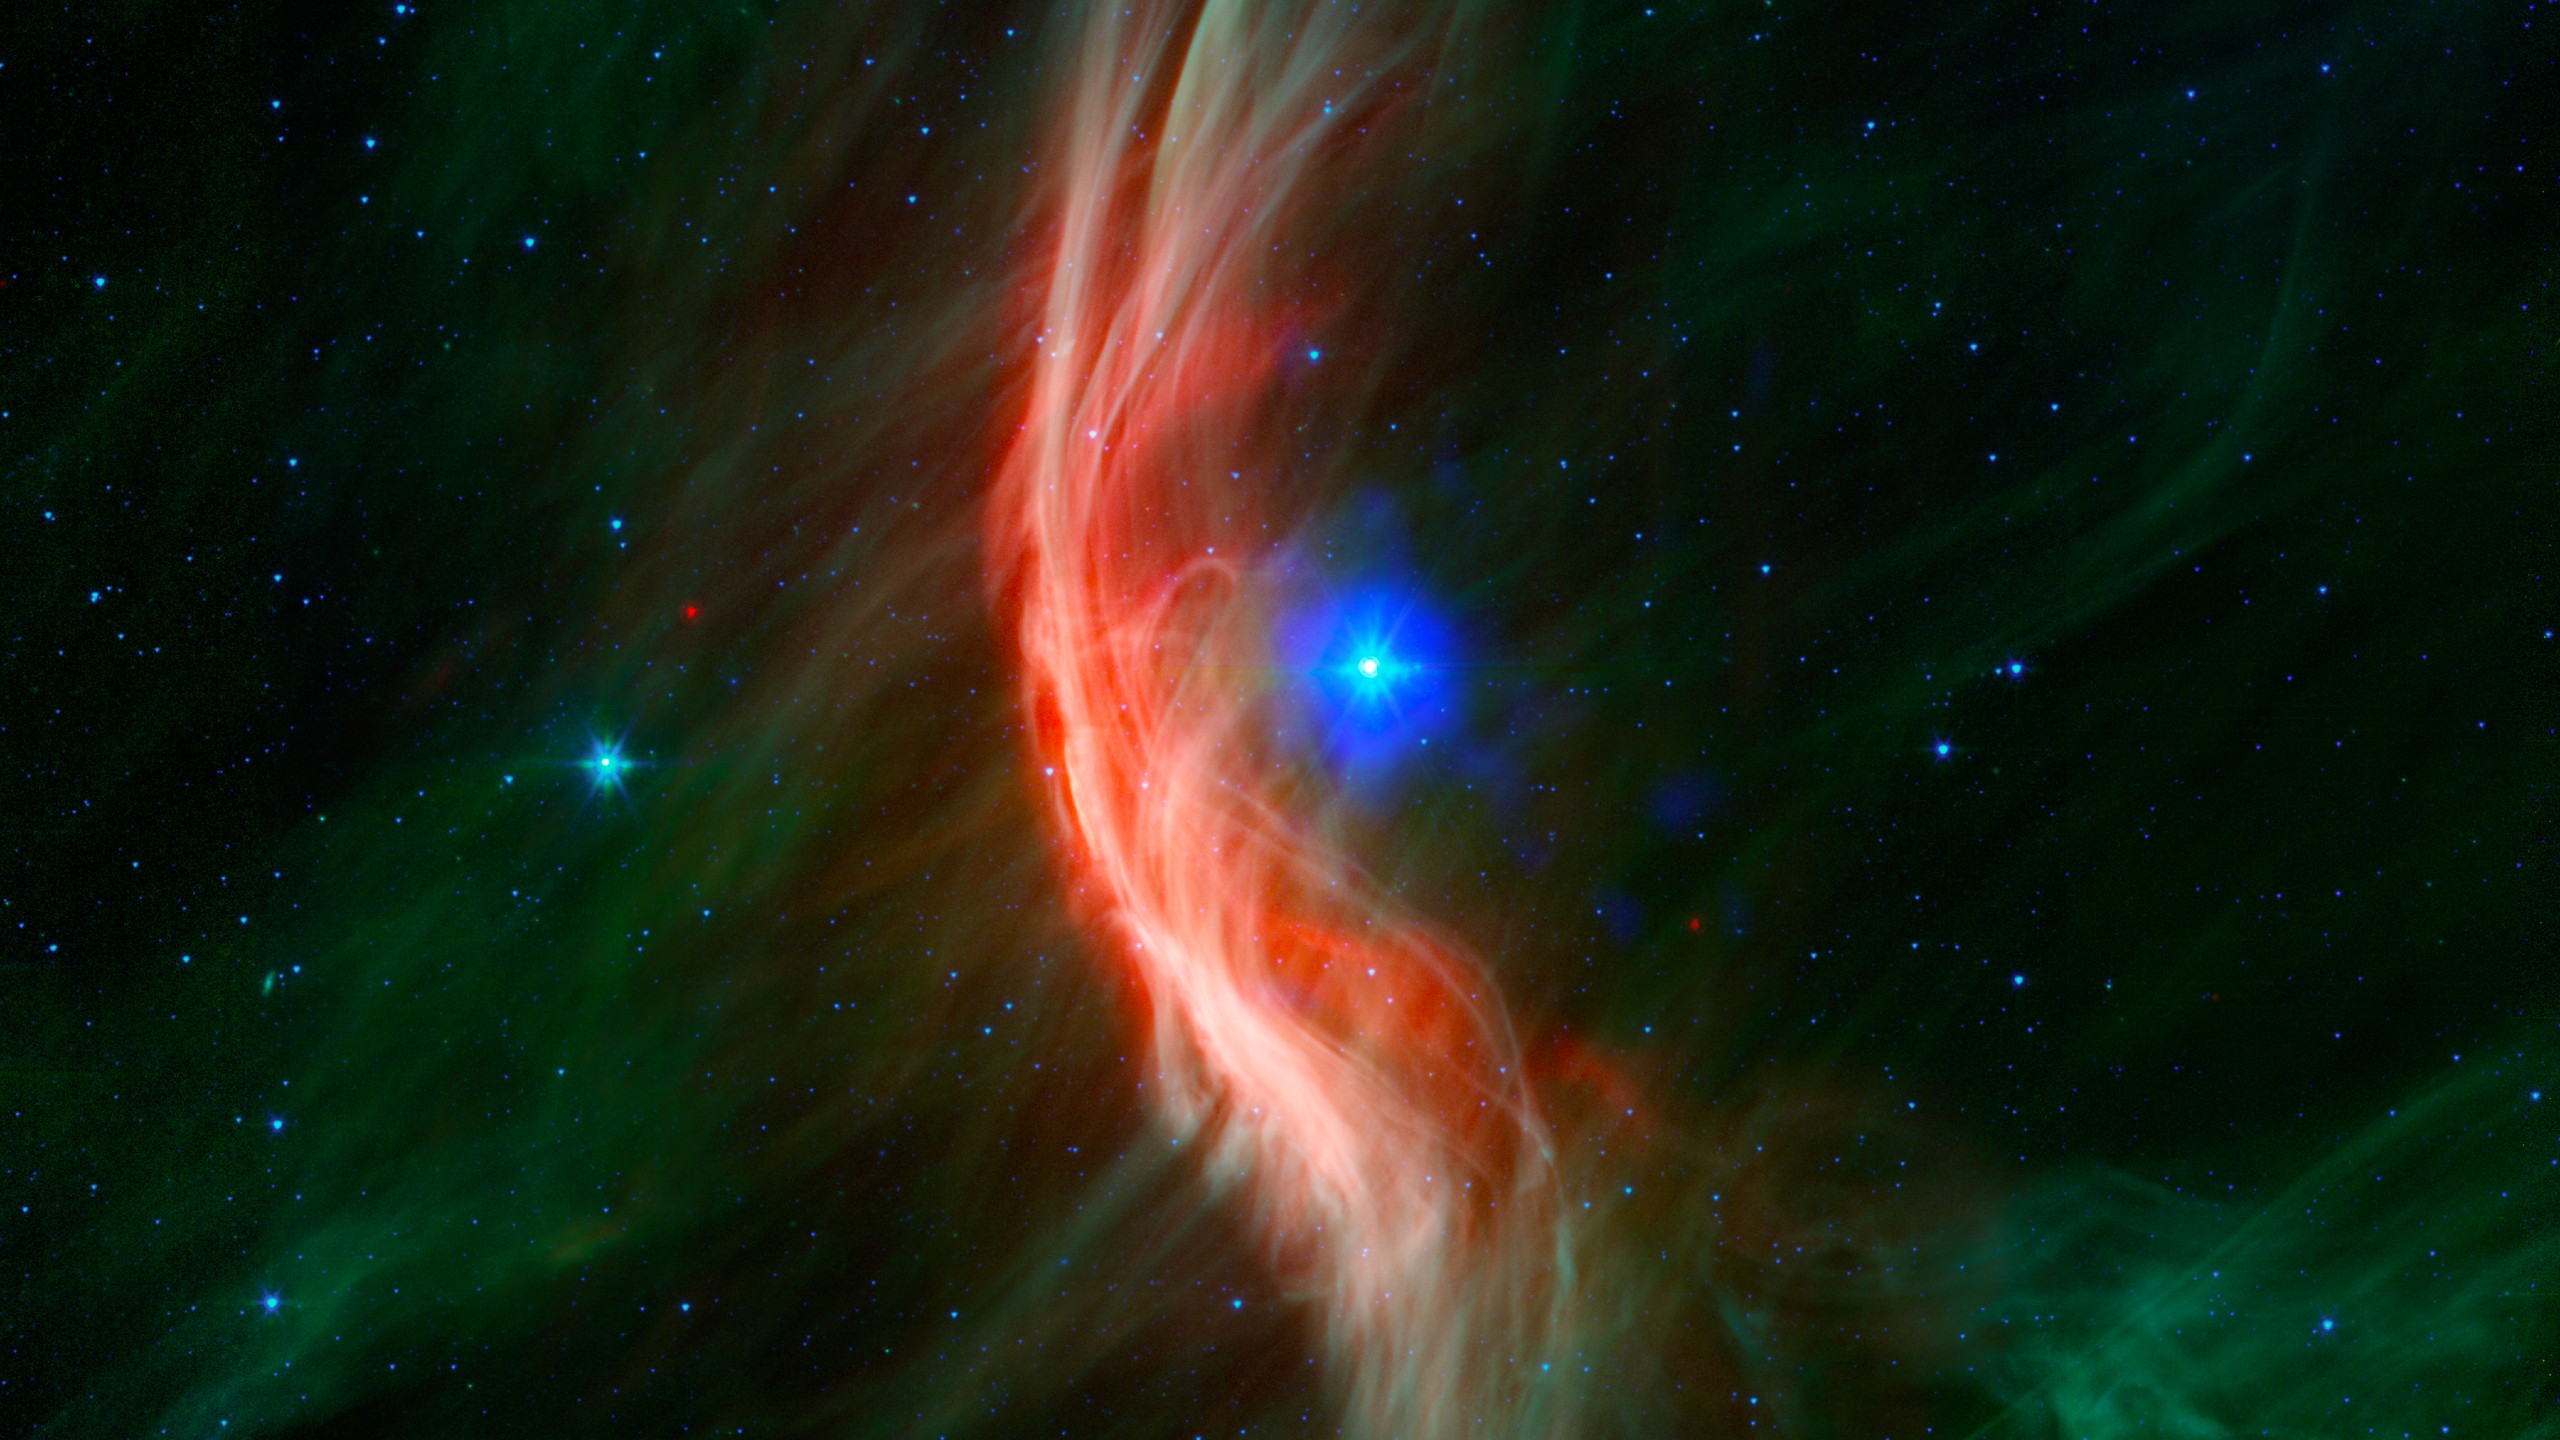 New clues emerge about runaway star Zeta Ophiuchi's violent past thumbnail